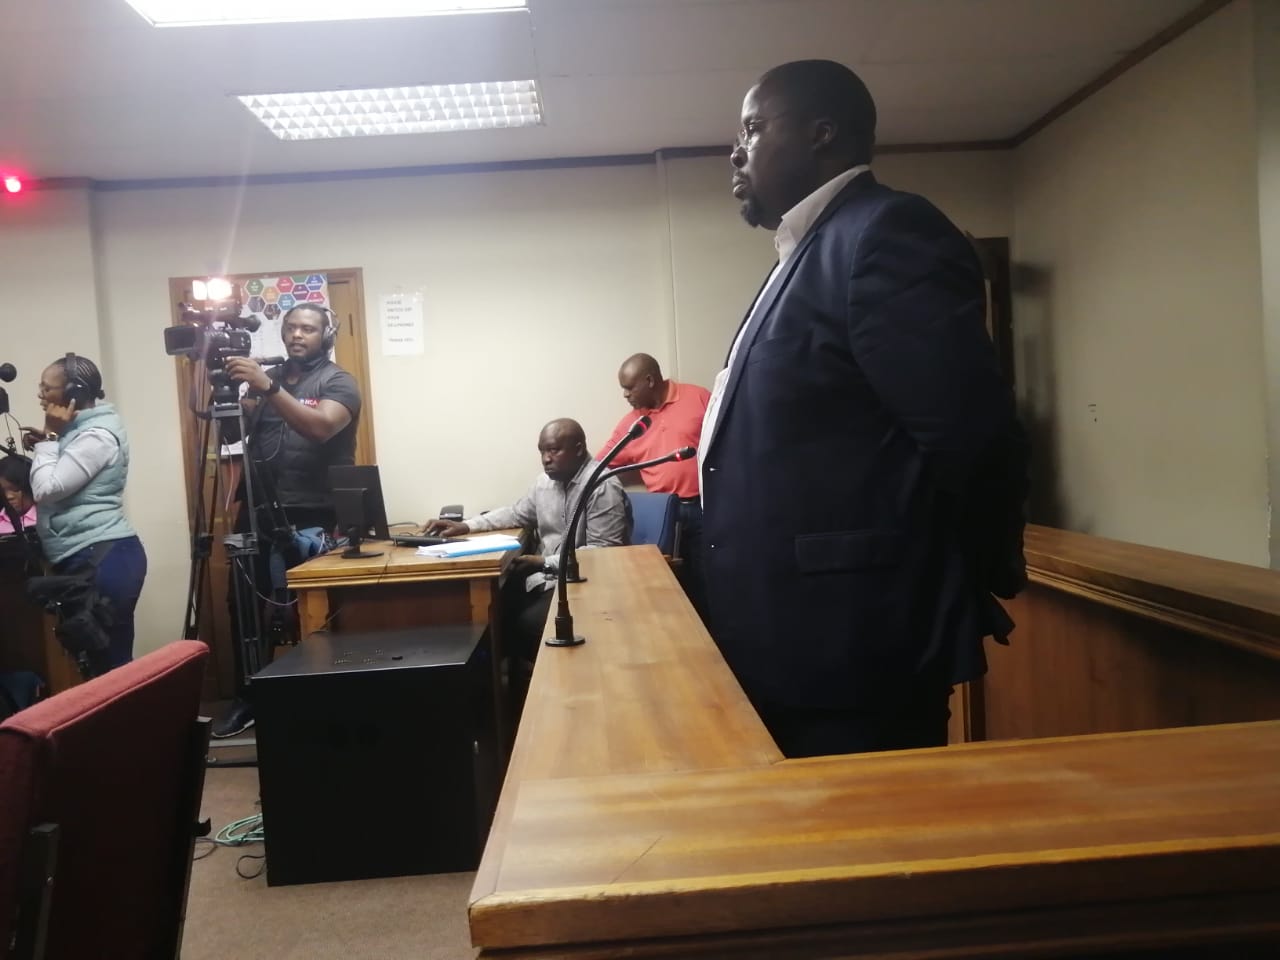 Pretoria: 50 years old accused, Dr Murunwa Makwarela, ex Mayor from the city of Tshwane appeared this morning in the Pretoria Specialised Commercial Crimes Court on charges of fraud and uttering.